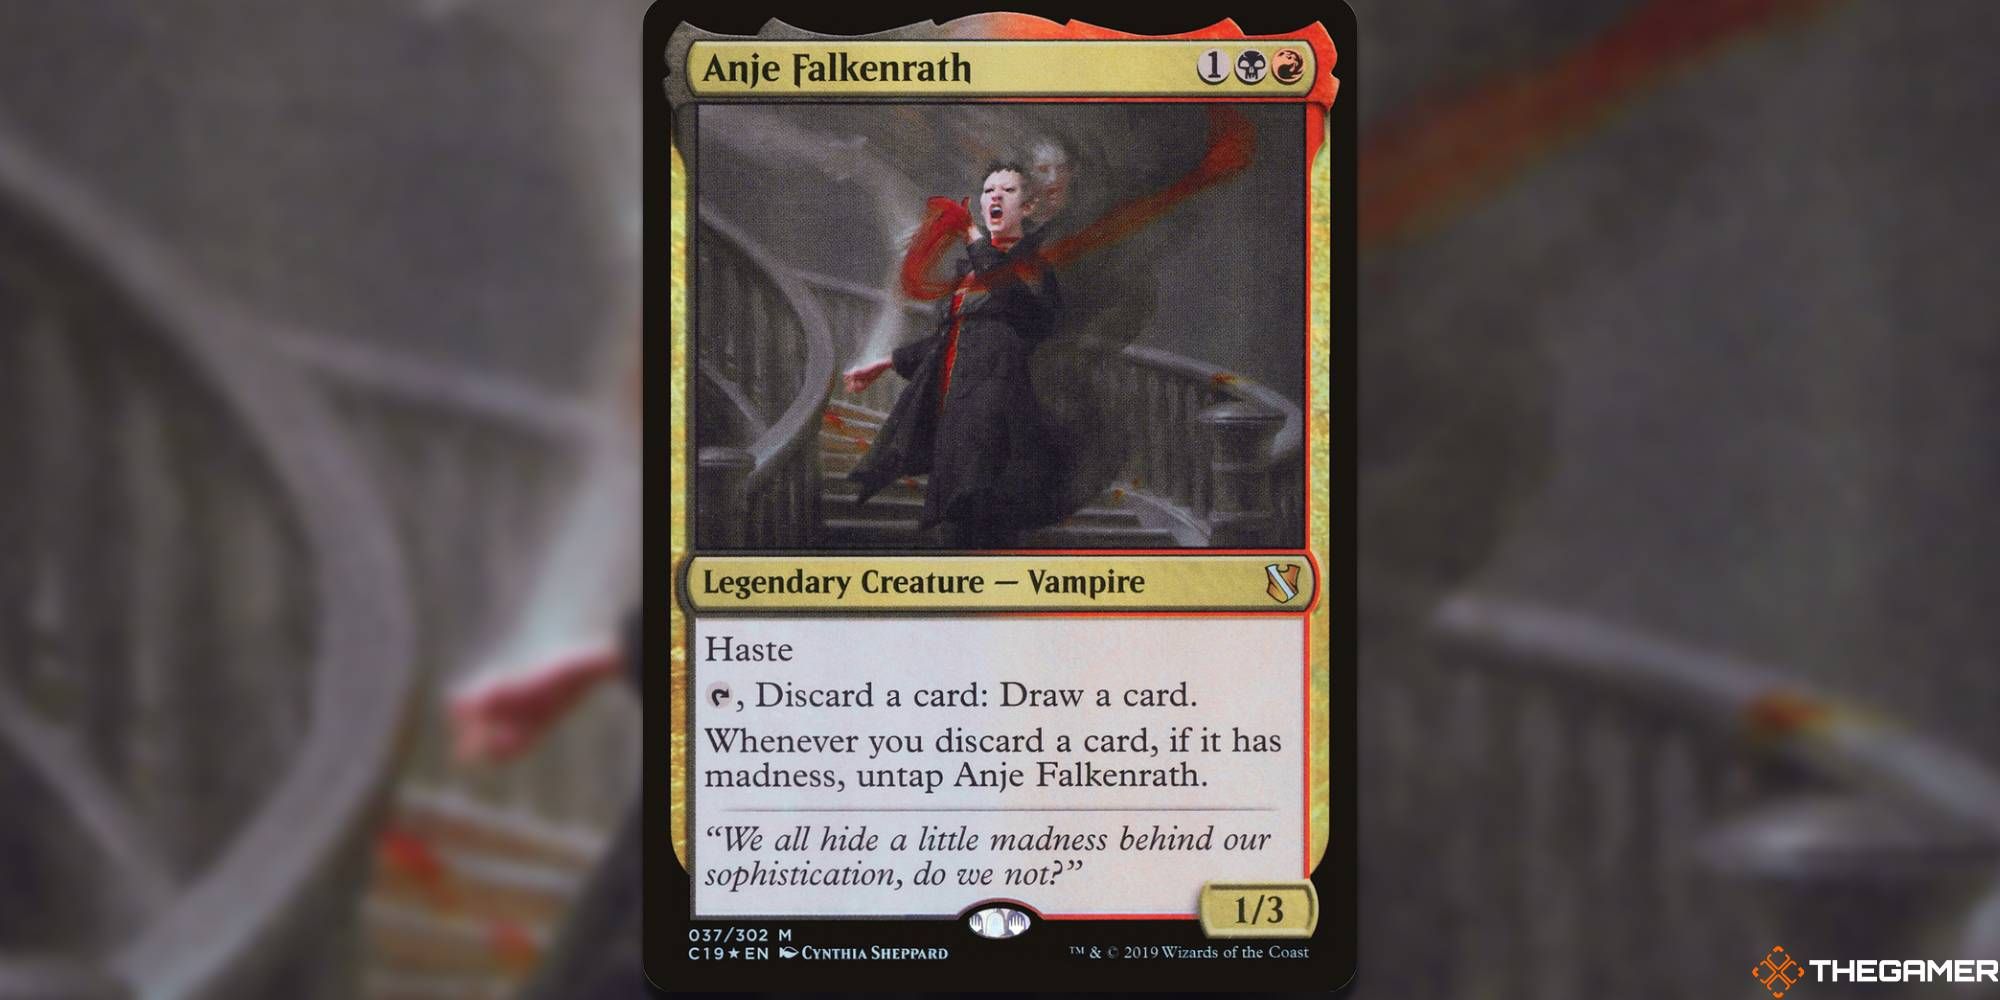 The vampire, Anje Falkenrath, walks down a set of curved, blood-stained stairs. She draws blood from a spirit behind her.